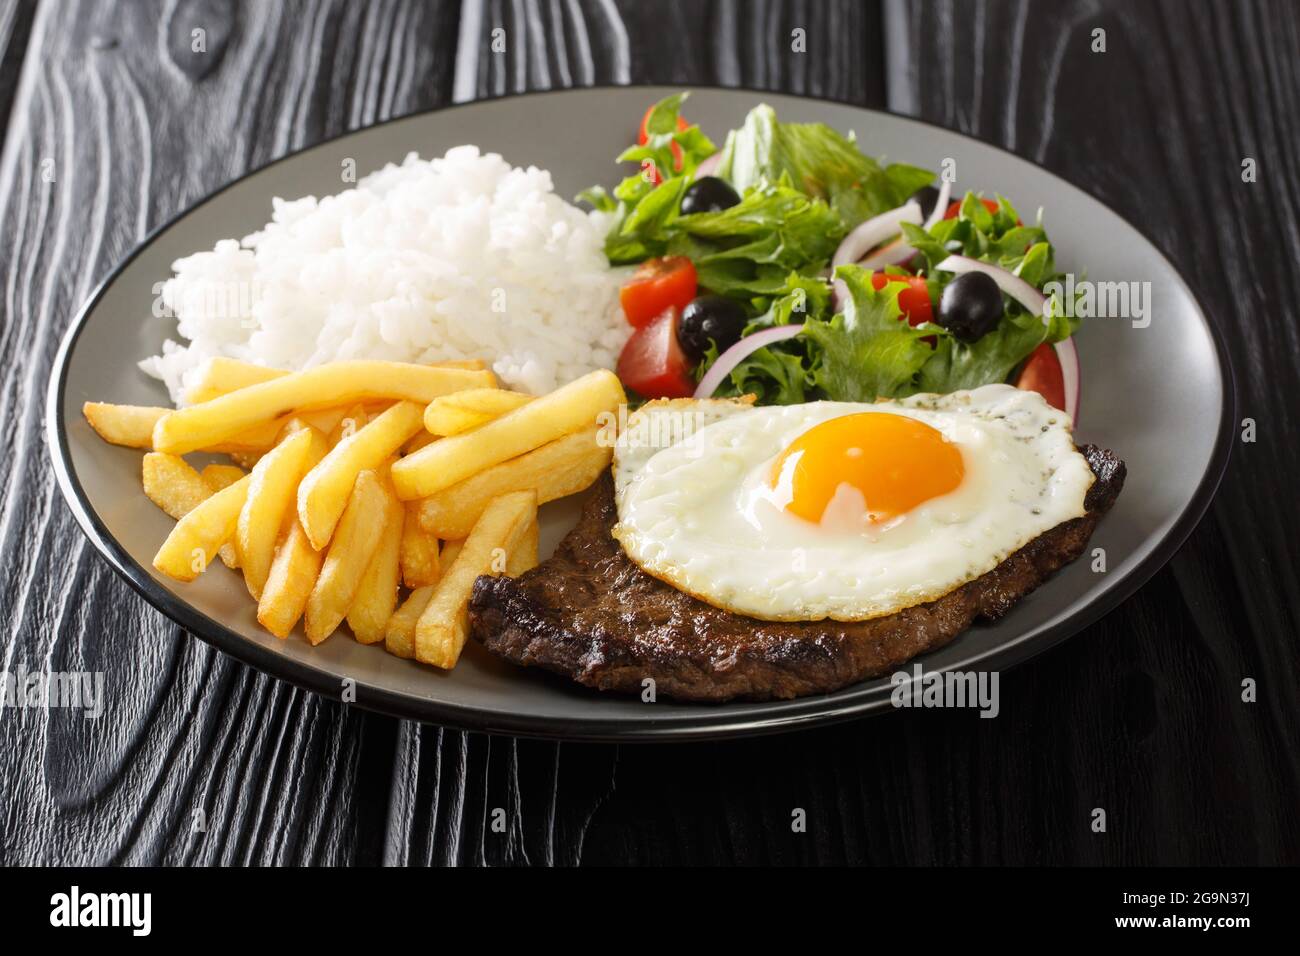 Bitoque is a beloved Portuguese dish that includes lean steak accompanied by rice and french fries topped with a fried egg closeup in the plate on the Stock Photo